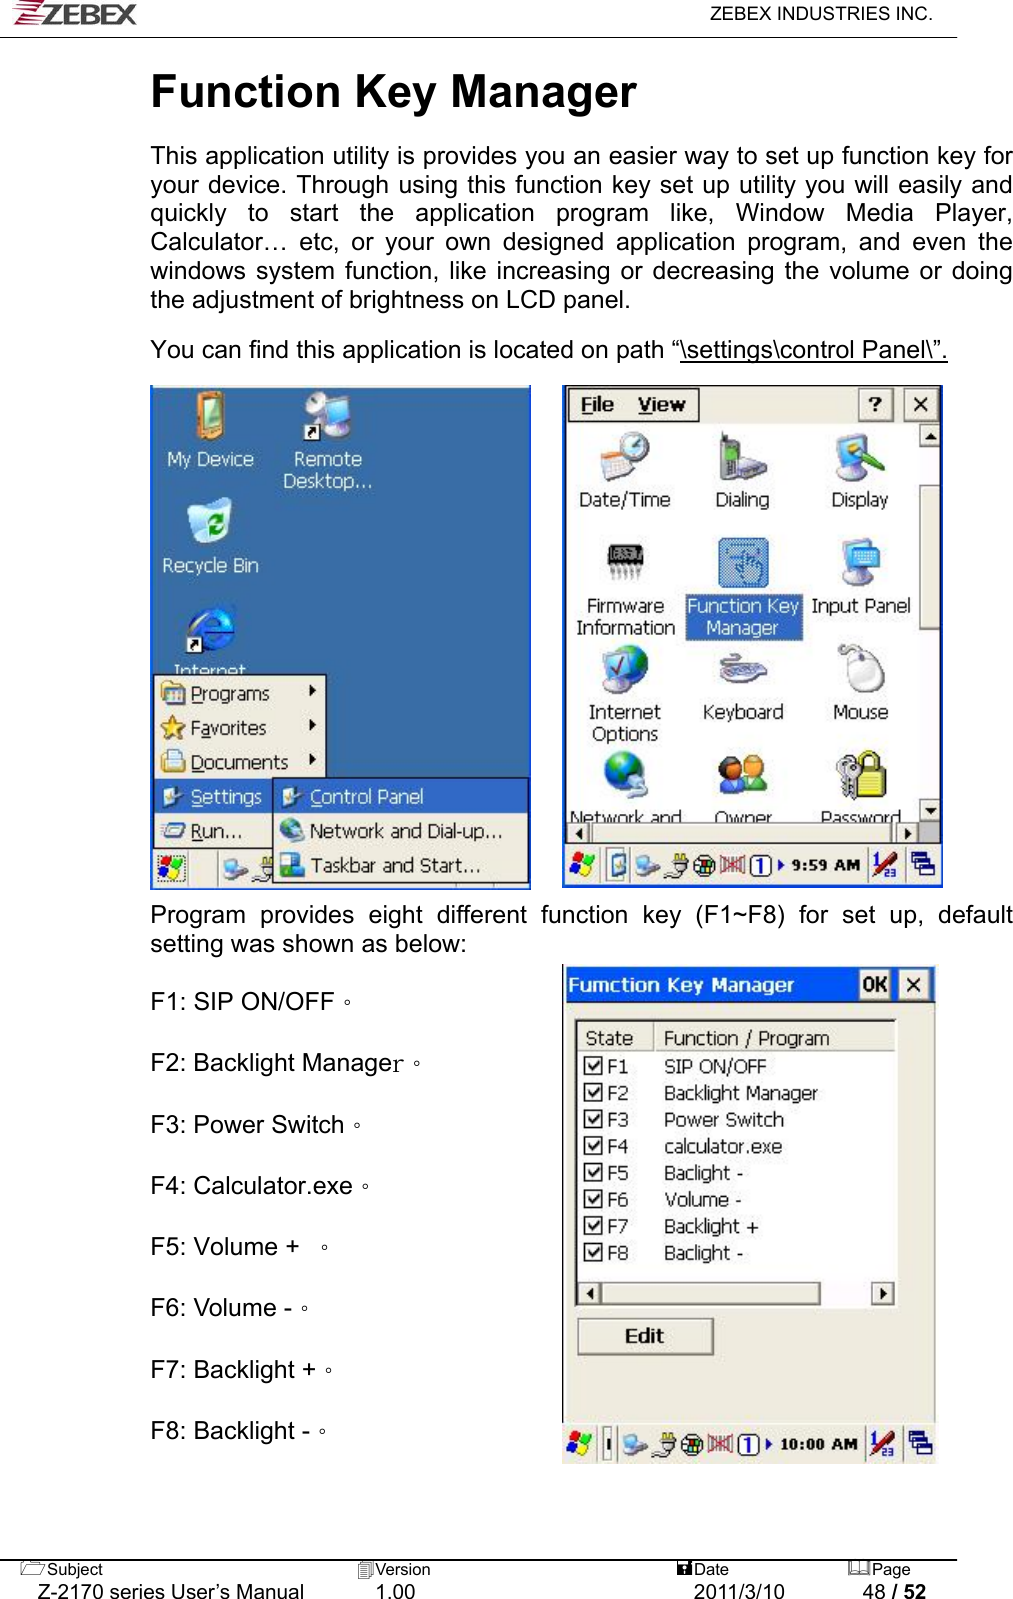   ZEBEX INDUSTRIES INC.  Function Key Manager   This application utility is provides you an easier way to set up function key for your device. Through using this function key set up utility you will easily and quickly to start the application program like, Window Media Player, Calculator… etc, or your own designed application program, and even the windows system function, like increasing or decreasing the volume or doing the adjustment of brightness on LCD panel.  You can find this application is located on path “\settings\control Panel\”.                    Program provides eight different function key (F1~F8) for set up, default setting was shown as below:  F1: SIP ON/OFF。  F2: Backlight Manager。  F3: Power Switch。  F4: Calculator.exe。  F5: Volume +  。              F6: Volume -。              F7: Backlight +。              F8: Backlight -。  Subject  Version   DatePage   Z-2170 series User’s Manual  1.00  2011/3/10  48 / 52 